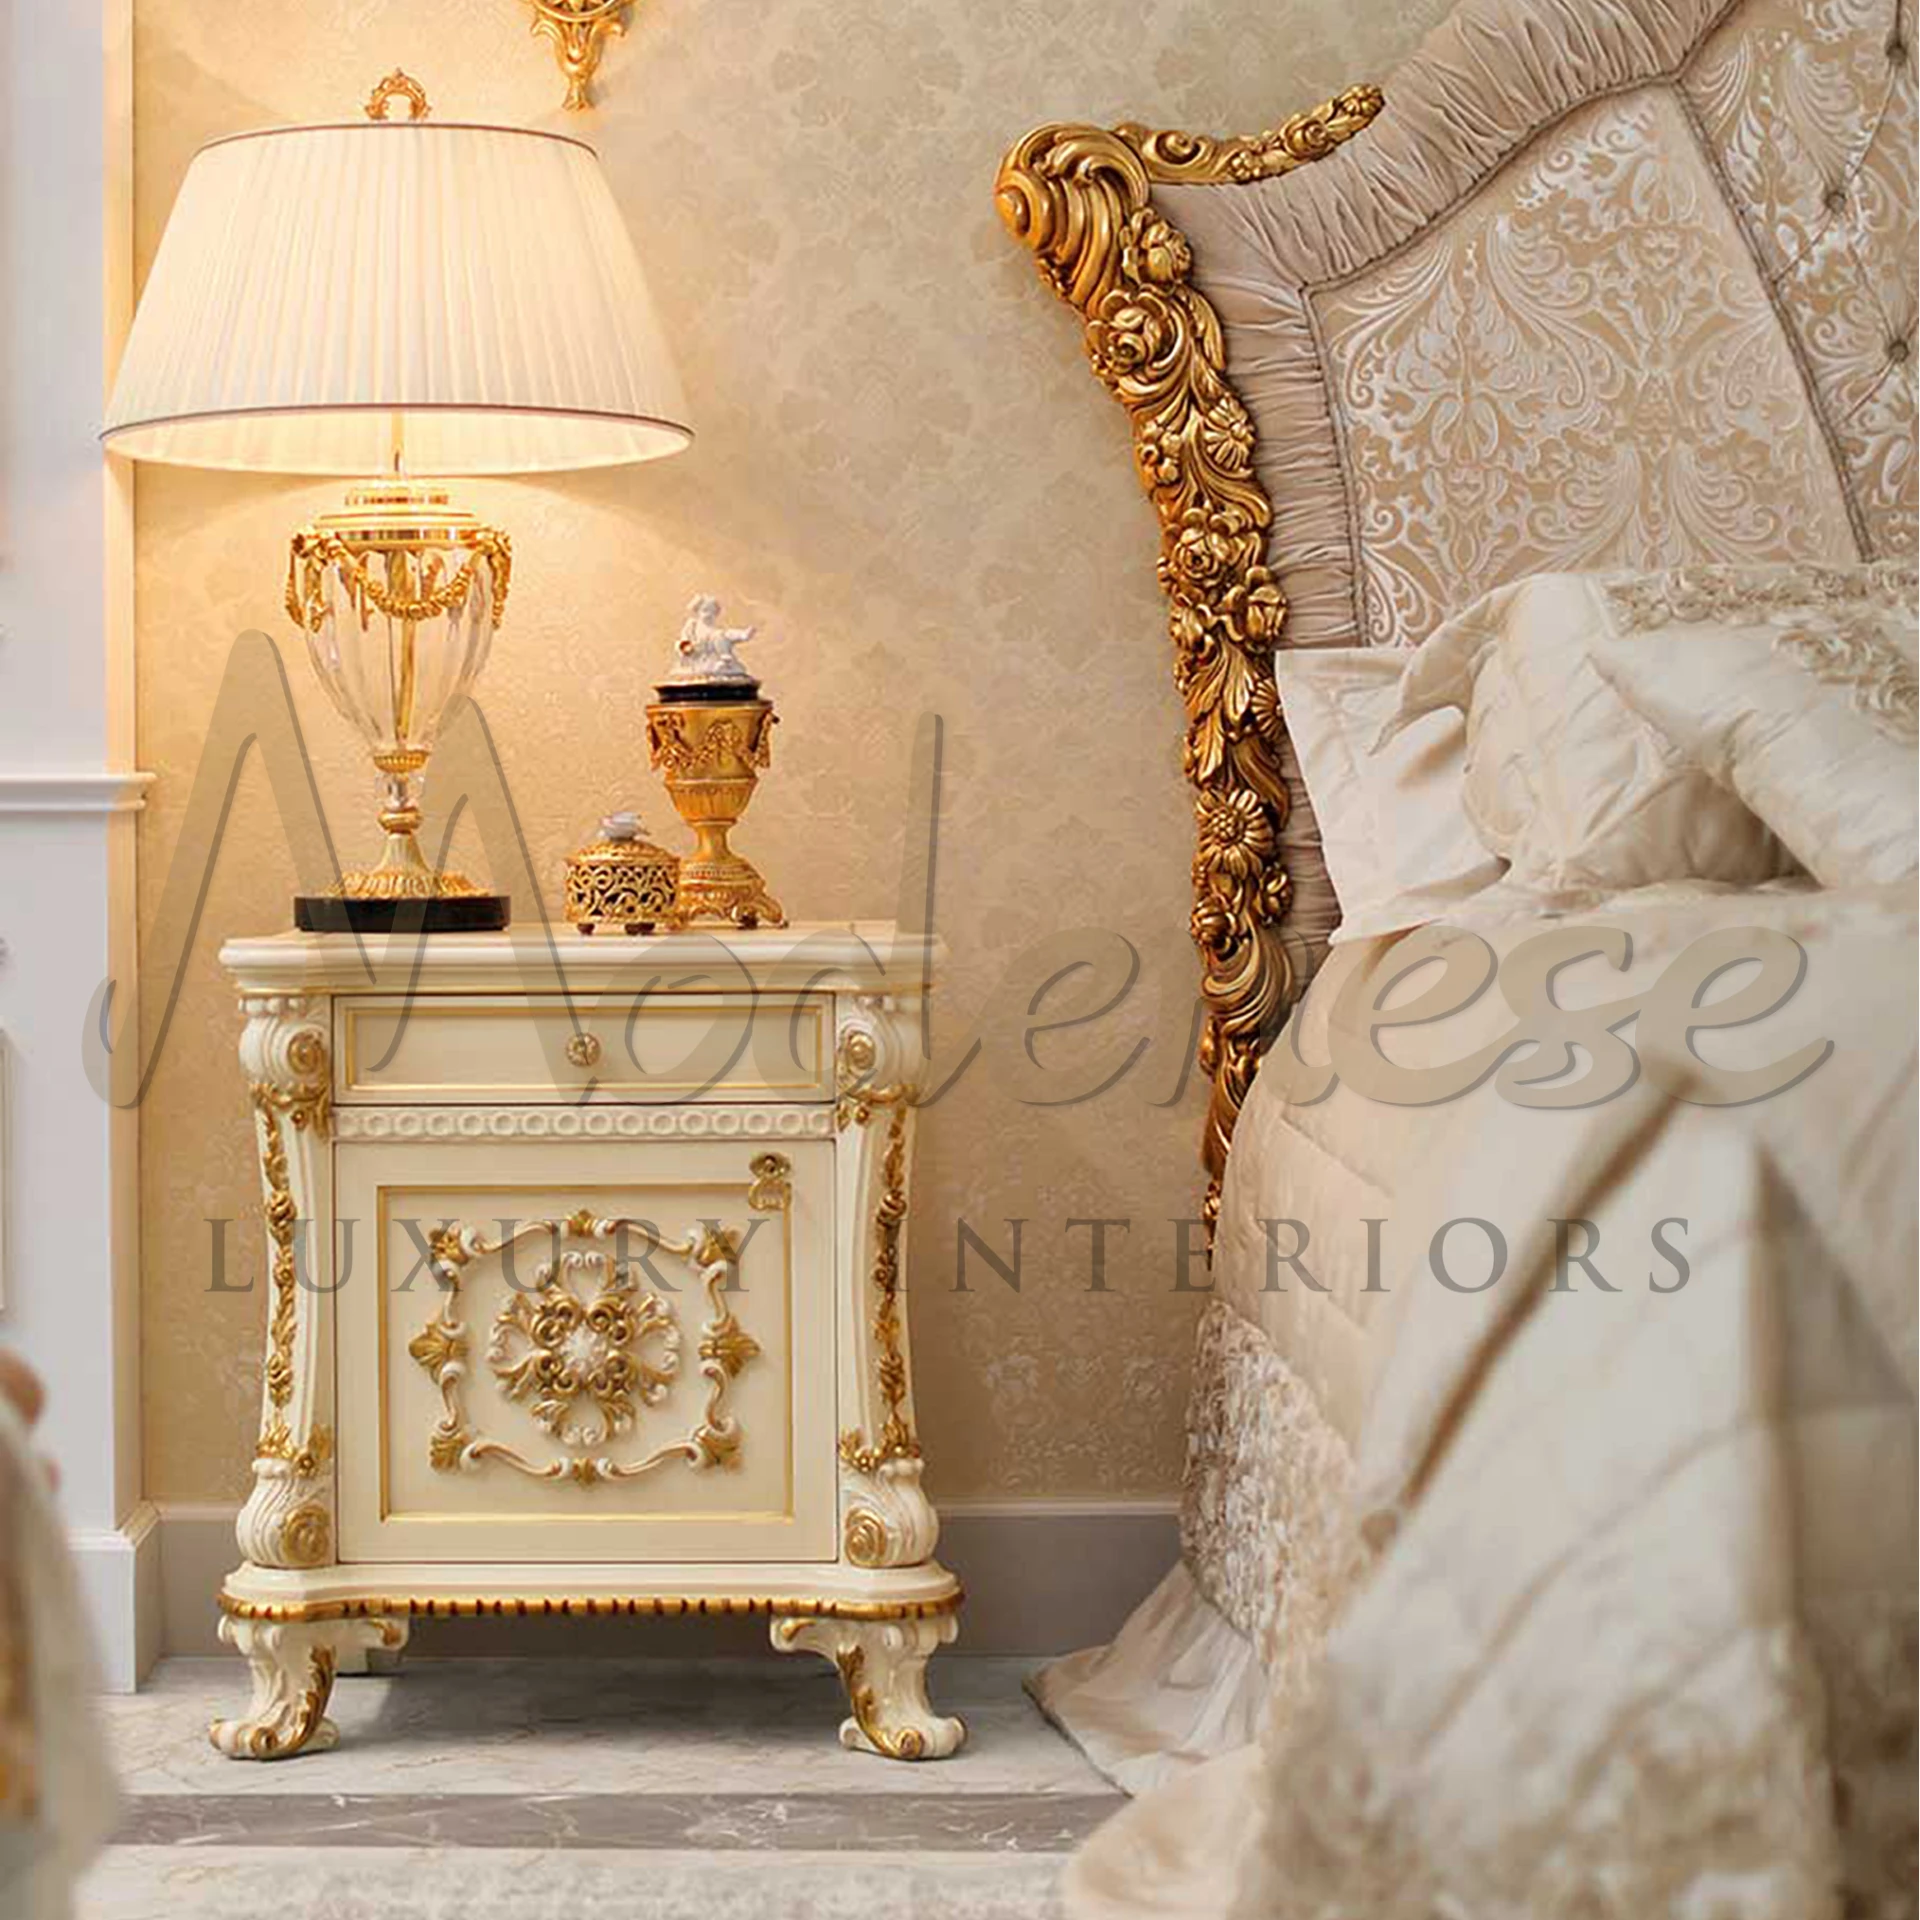 A baroque-style cream nightstand with gold trim, topped with a lamp and ornate decorative items, beside an opulent bed.Made by Modenese Furniture Manufacturer.